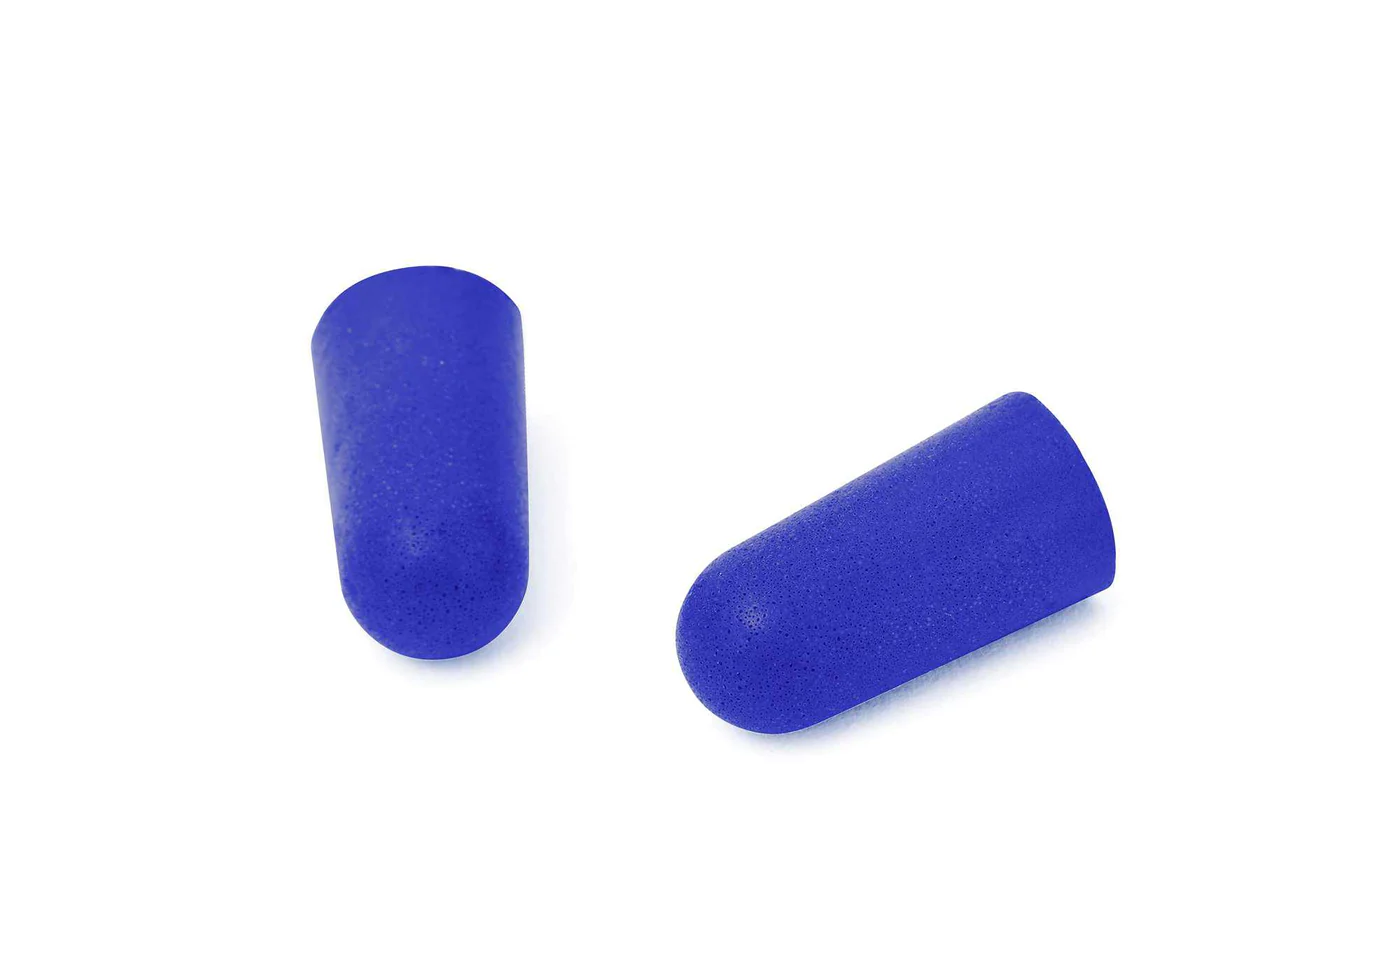 Two blue earplugs with a bell-shaped design.